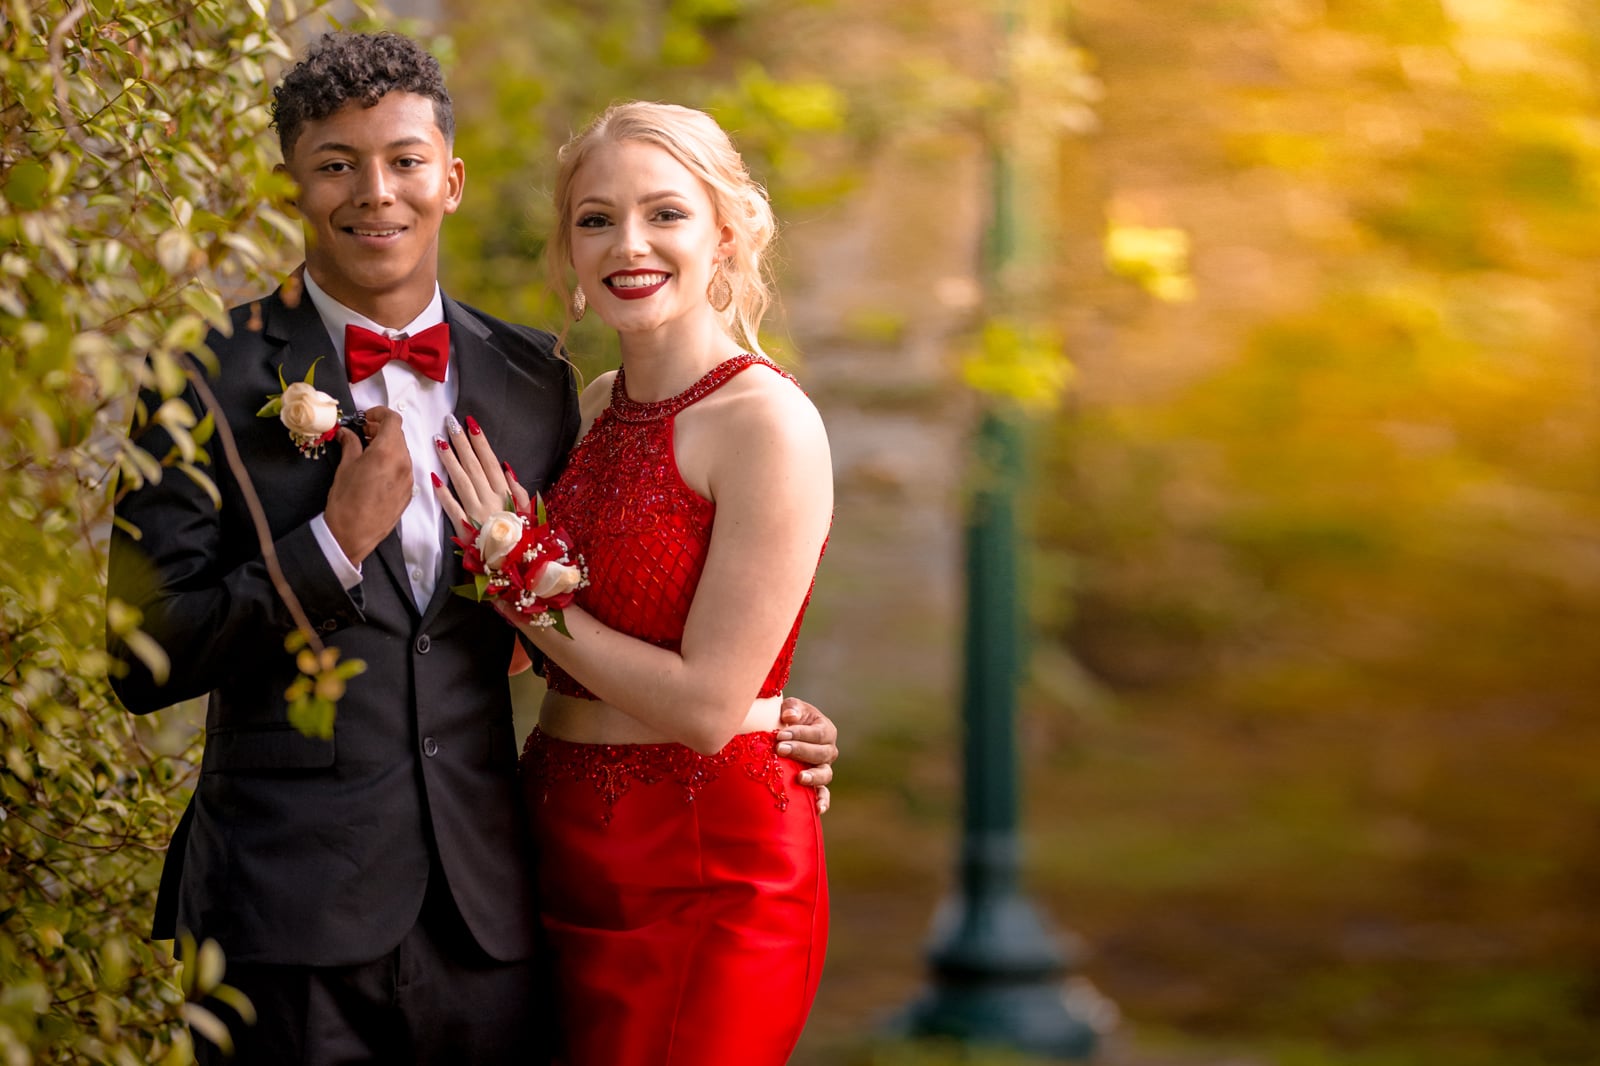 prom dates in suit and red dress pose next to green plant fence with light post in background